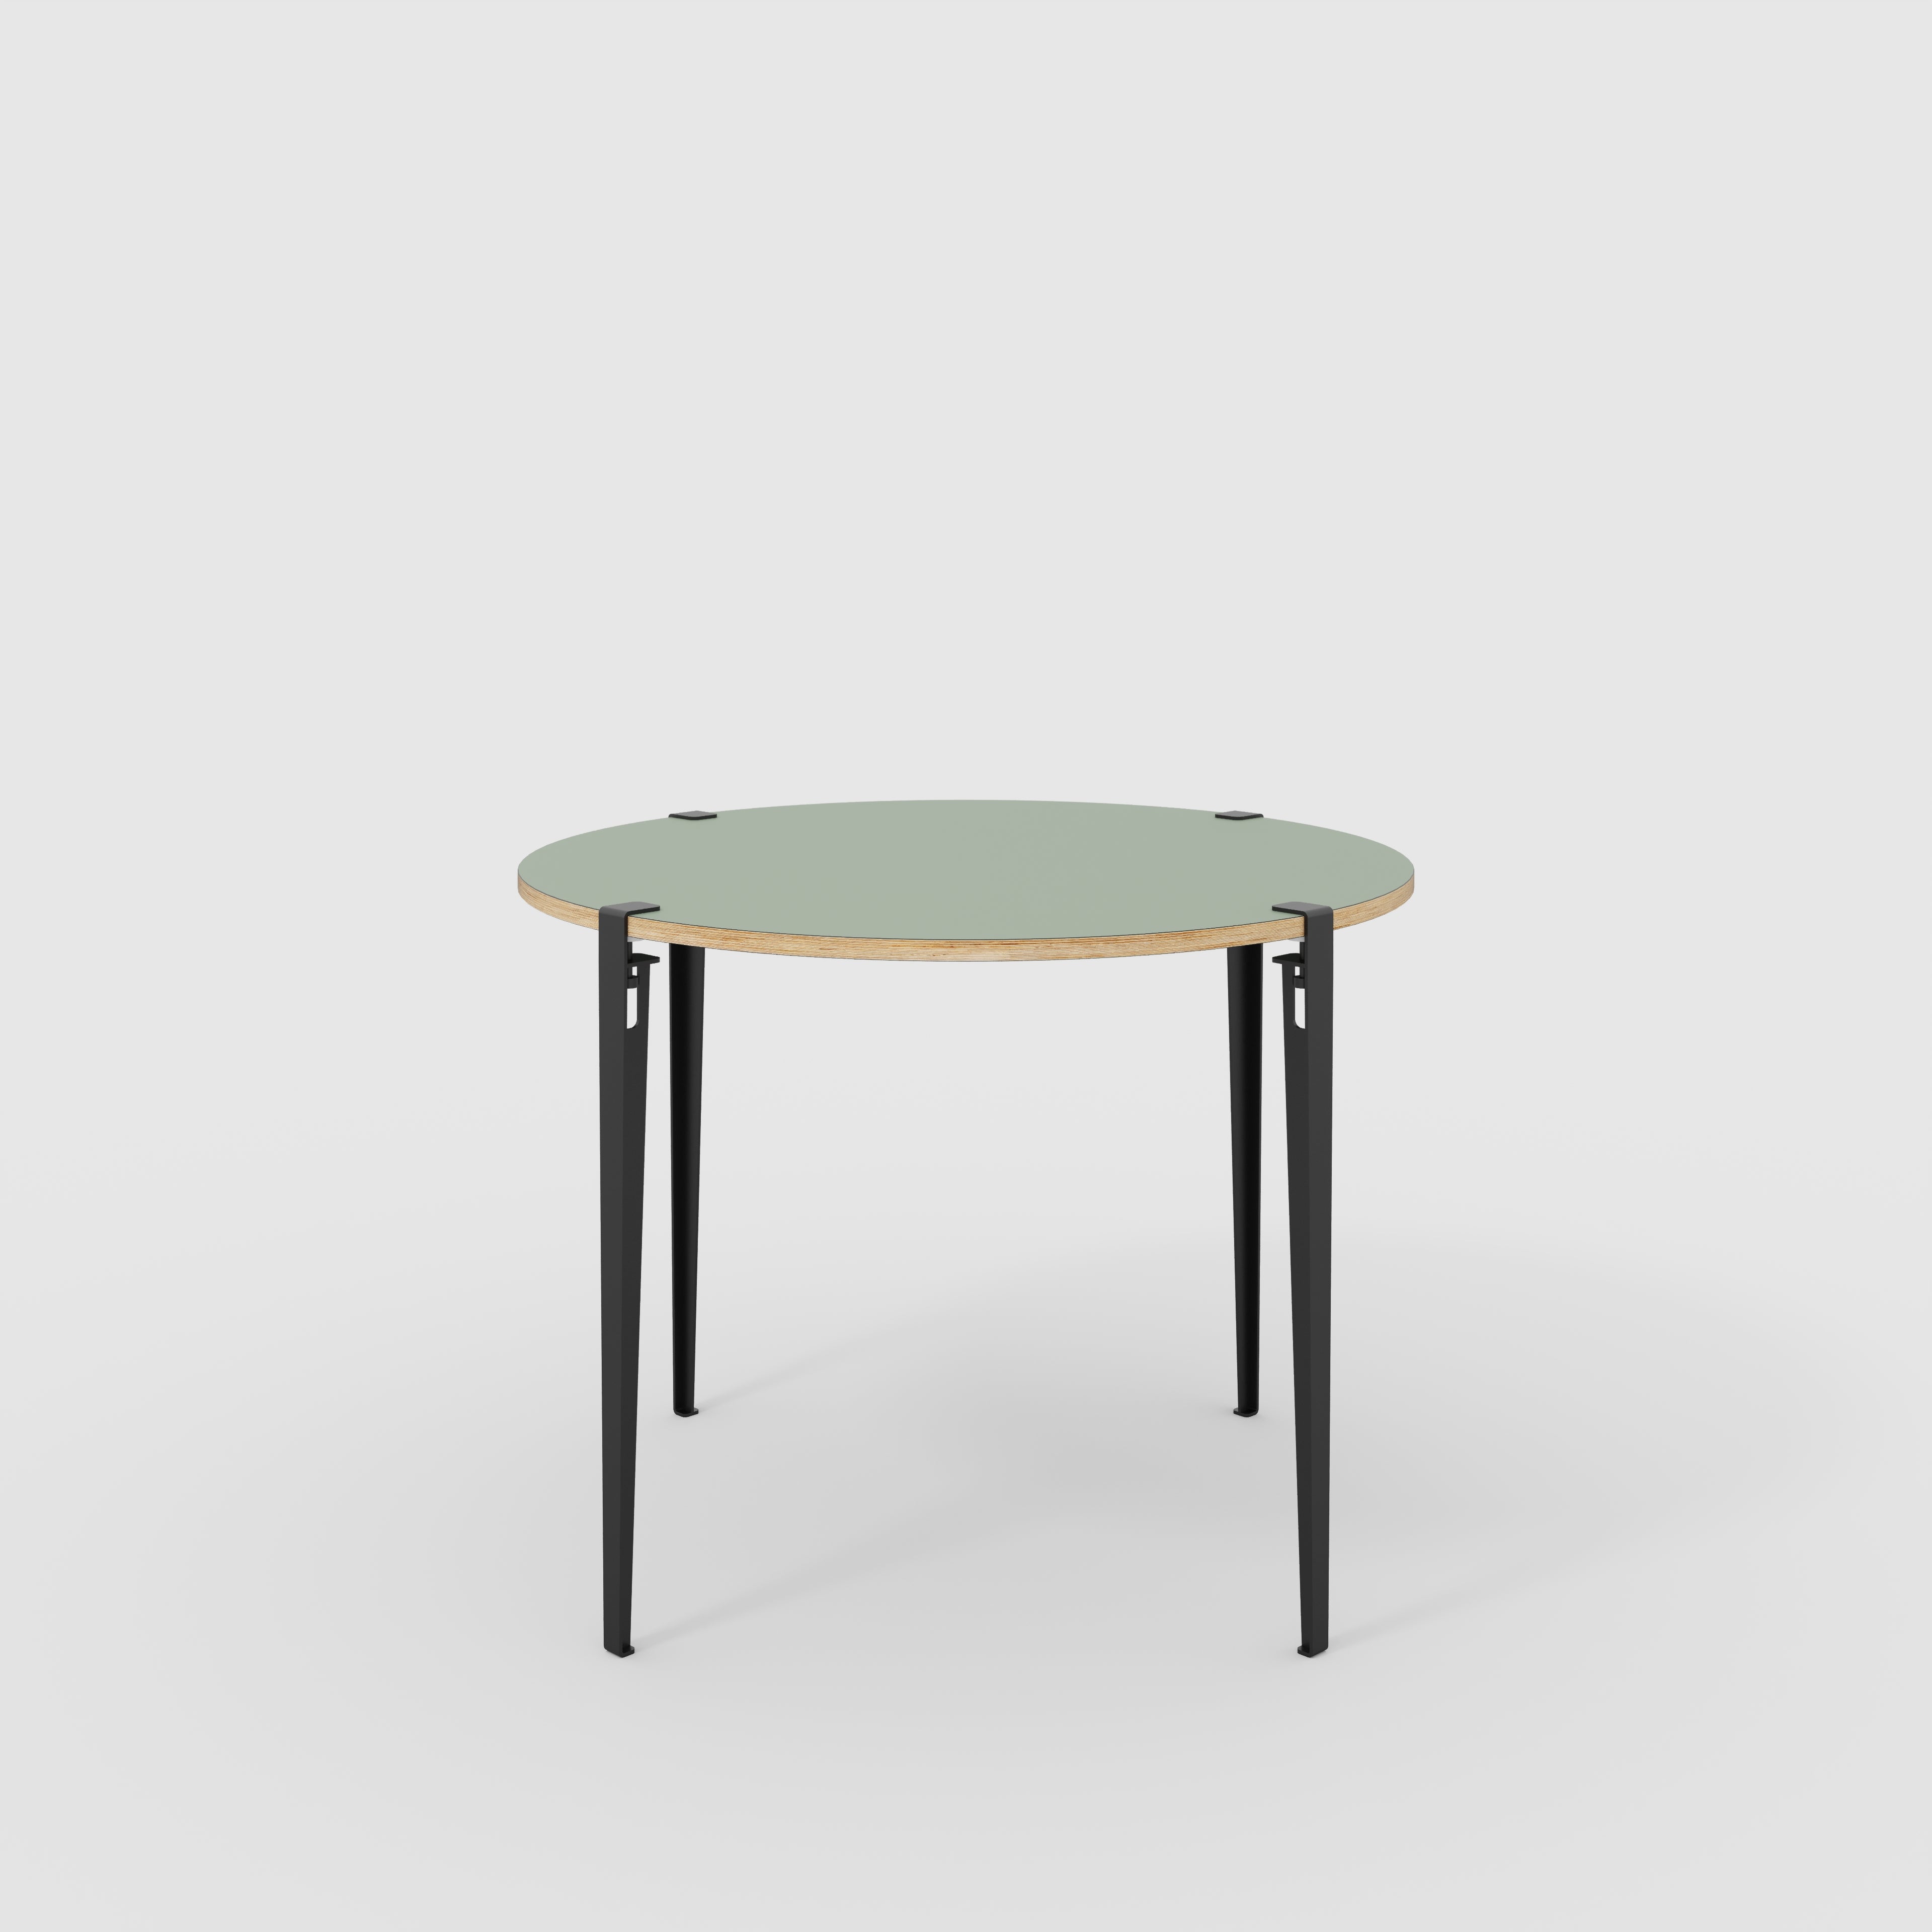 Round Table with Black Tiptoe Legs - Formica Green Slate - 1200(dia) x 900(h)